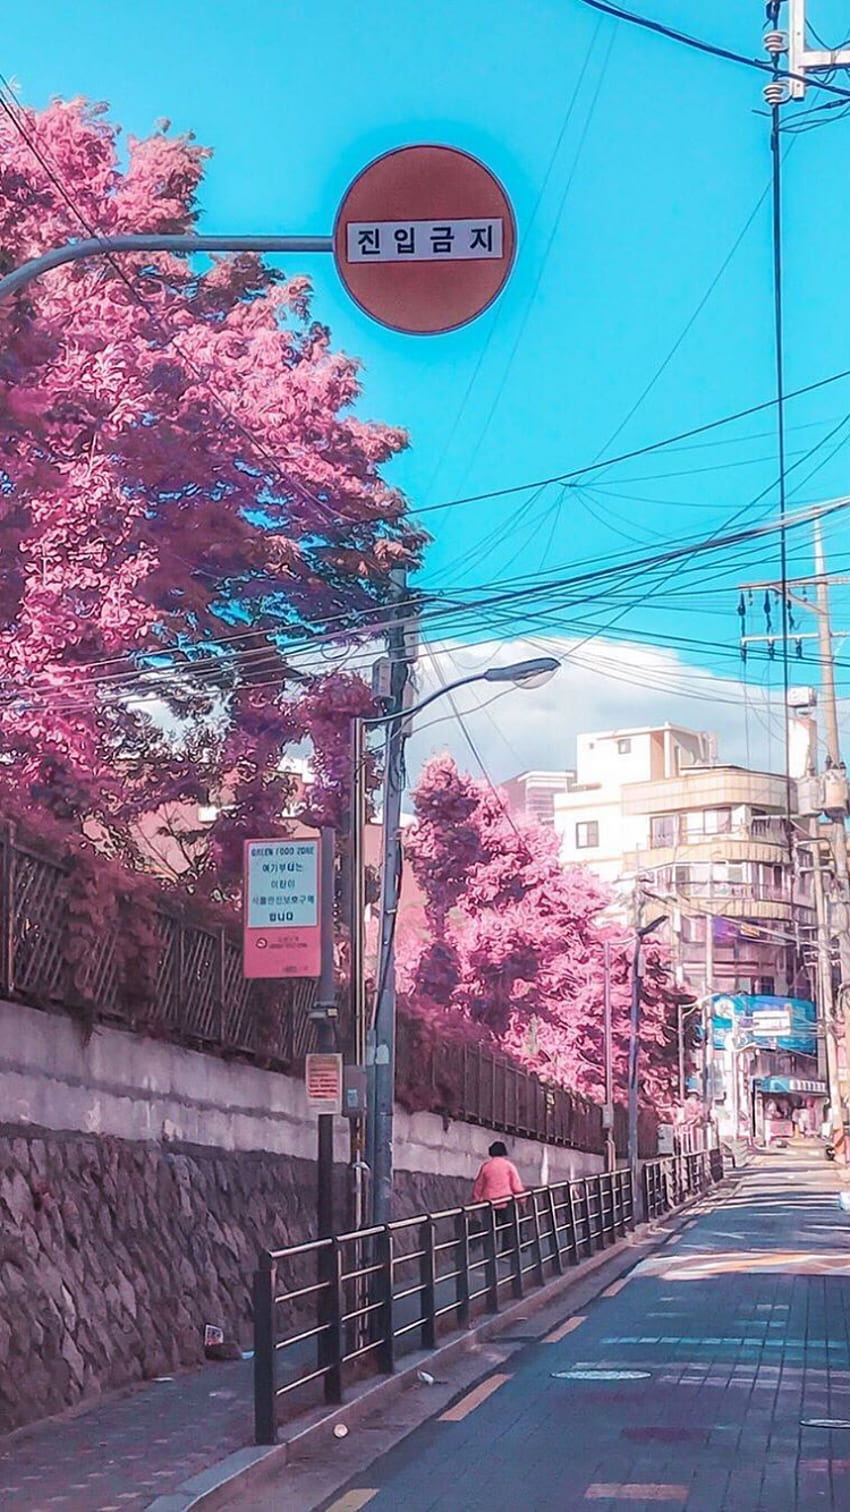 A street sign in a foreign language is displayed above a street with trees in bloom. - Anime city, Seoul, Korean